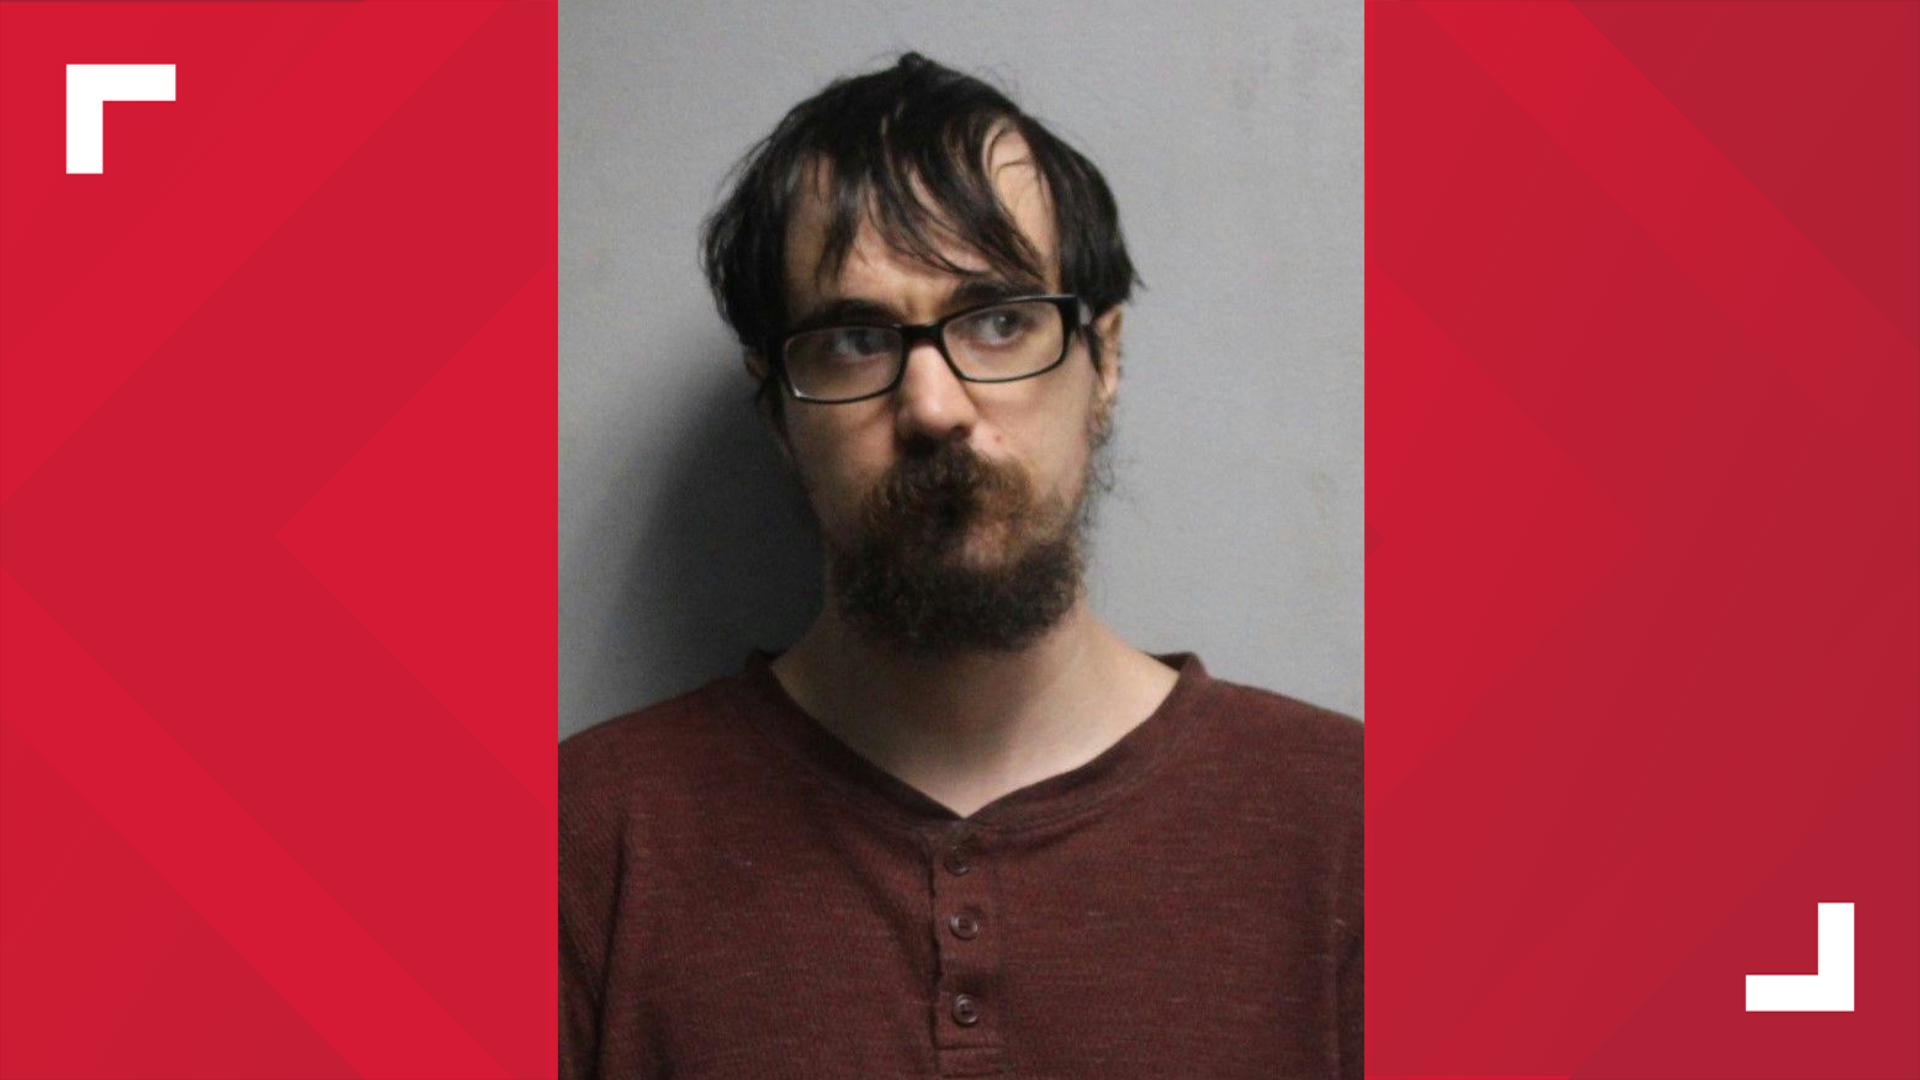 He was sentenced in April 2018 to 78 months in prison for distributing child sexual abuse images of pre-school-aged children.